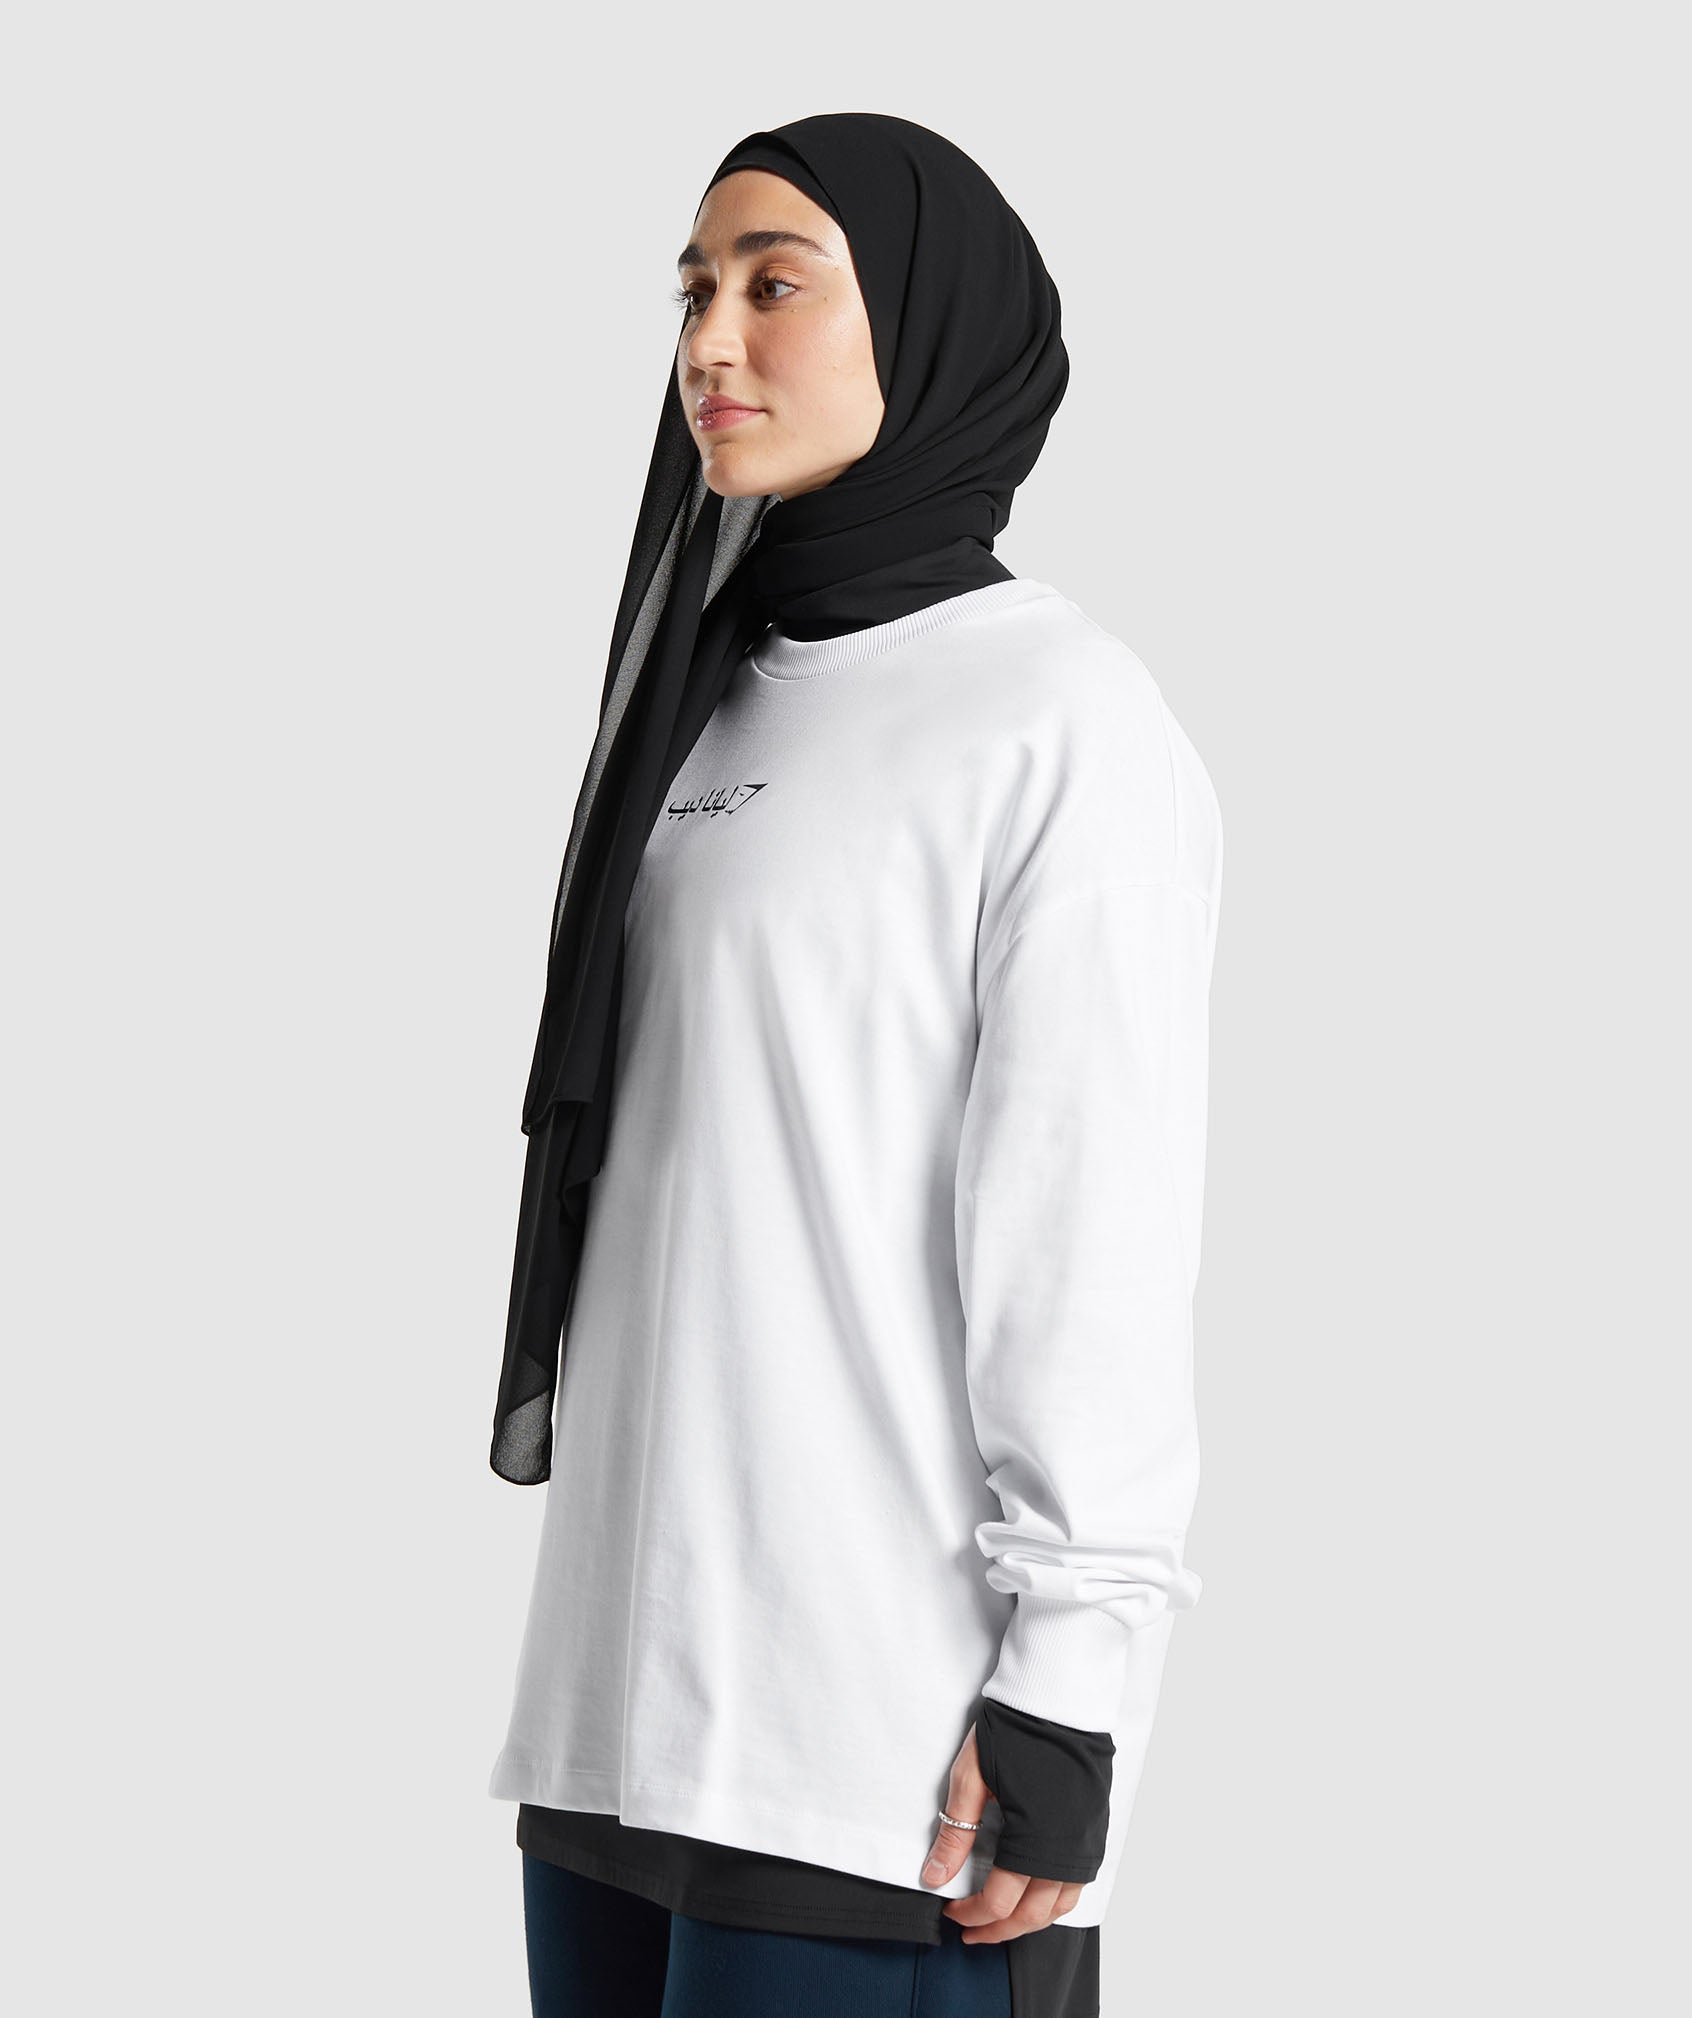 GS X Leana Deeb Oversized Long Sleeve Top in White - view 3